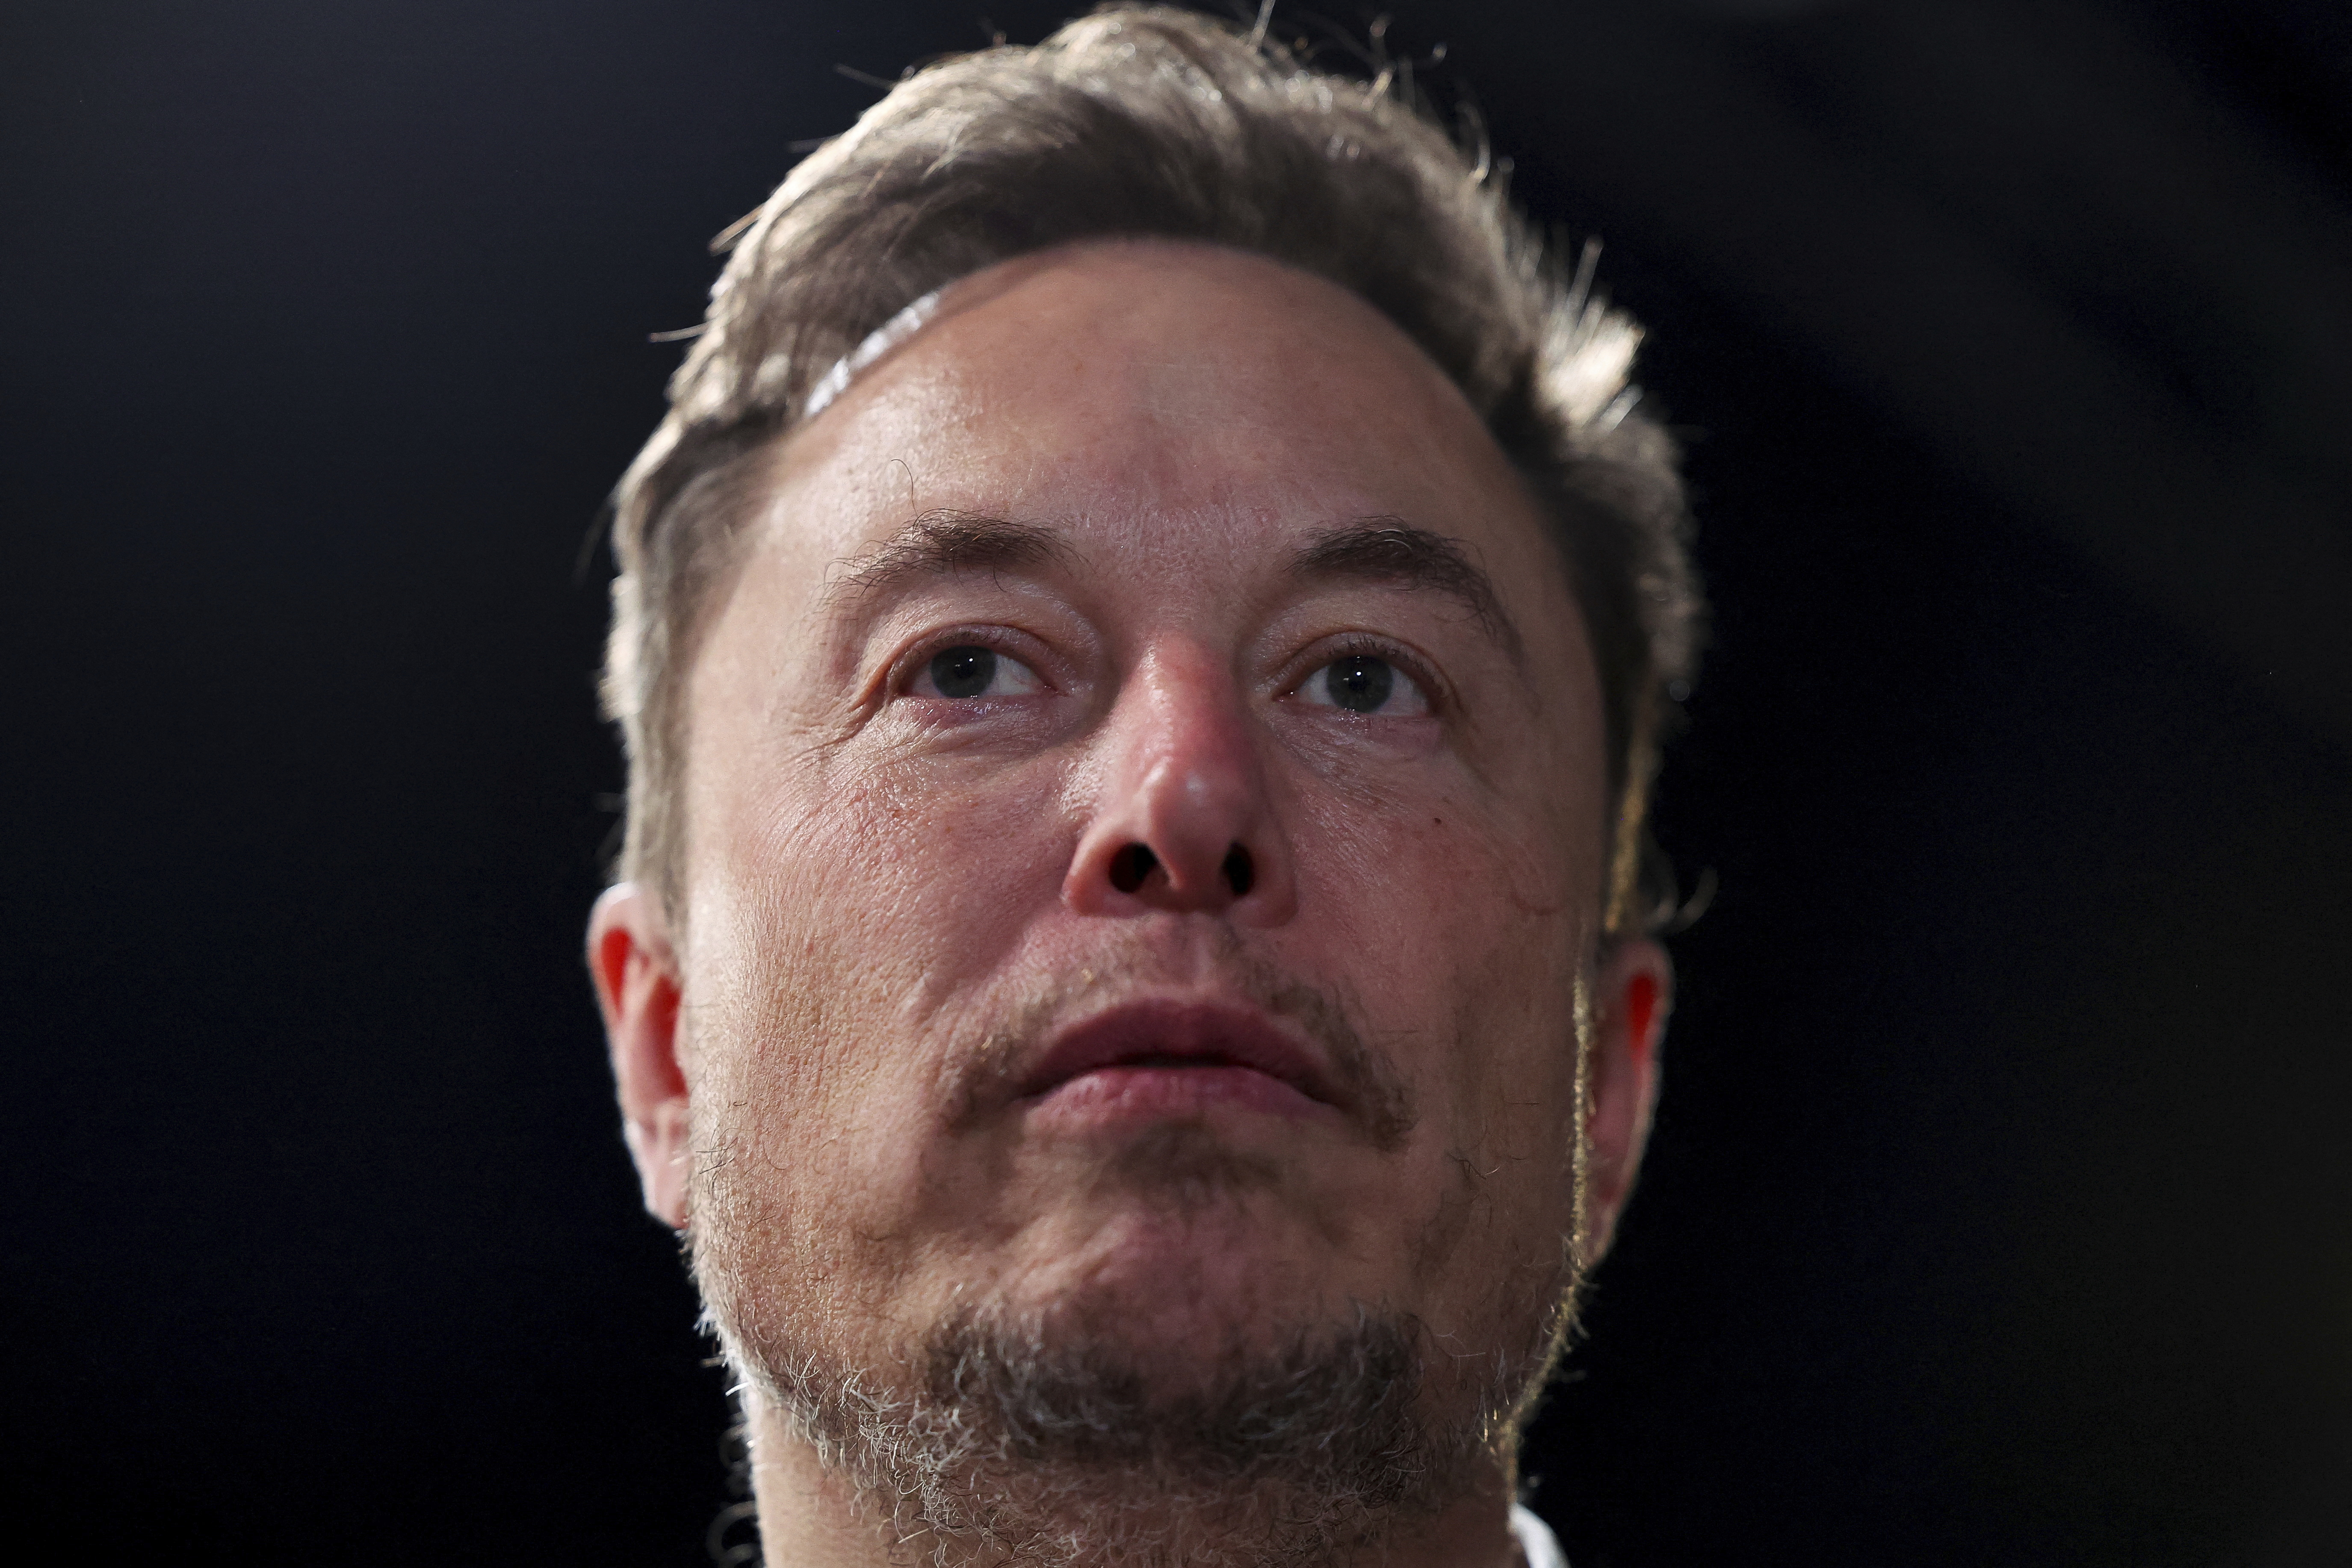 Elon Musk's X could lose $75 million in ad revenue following antisemitic content backlash